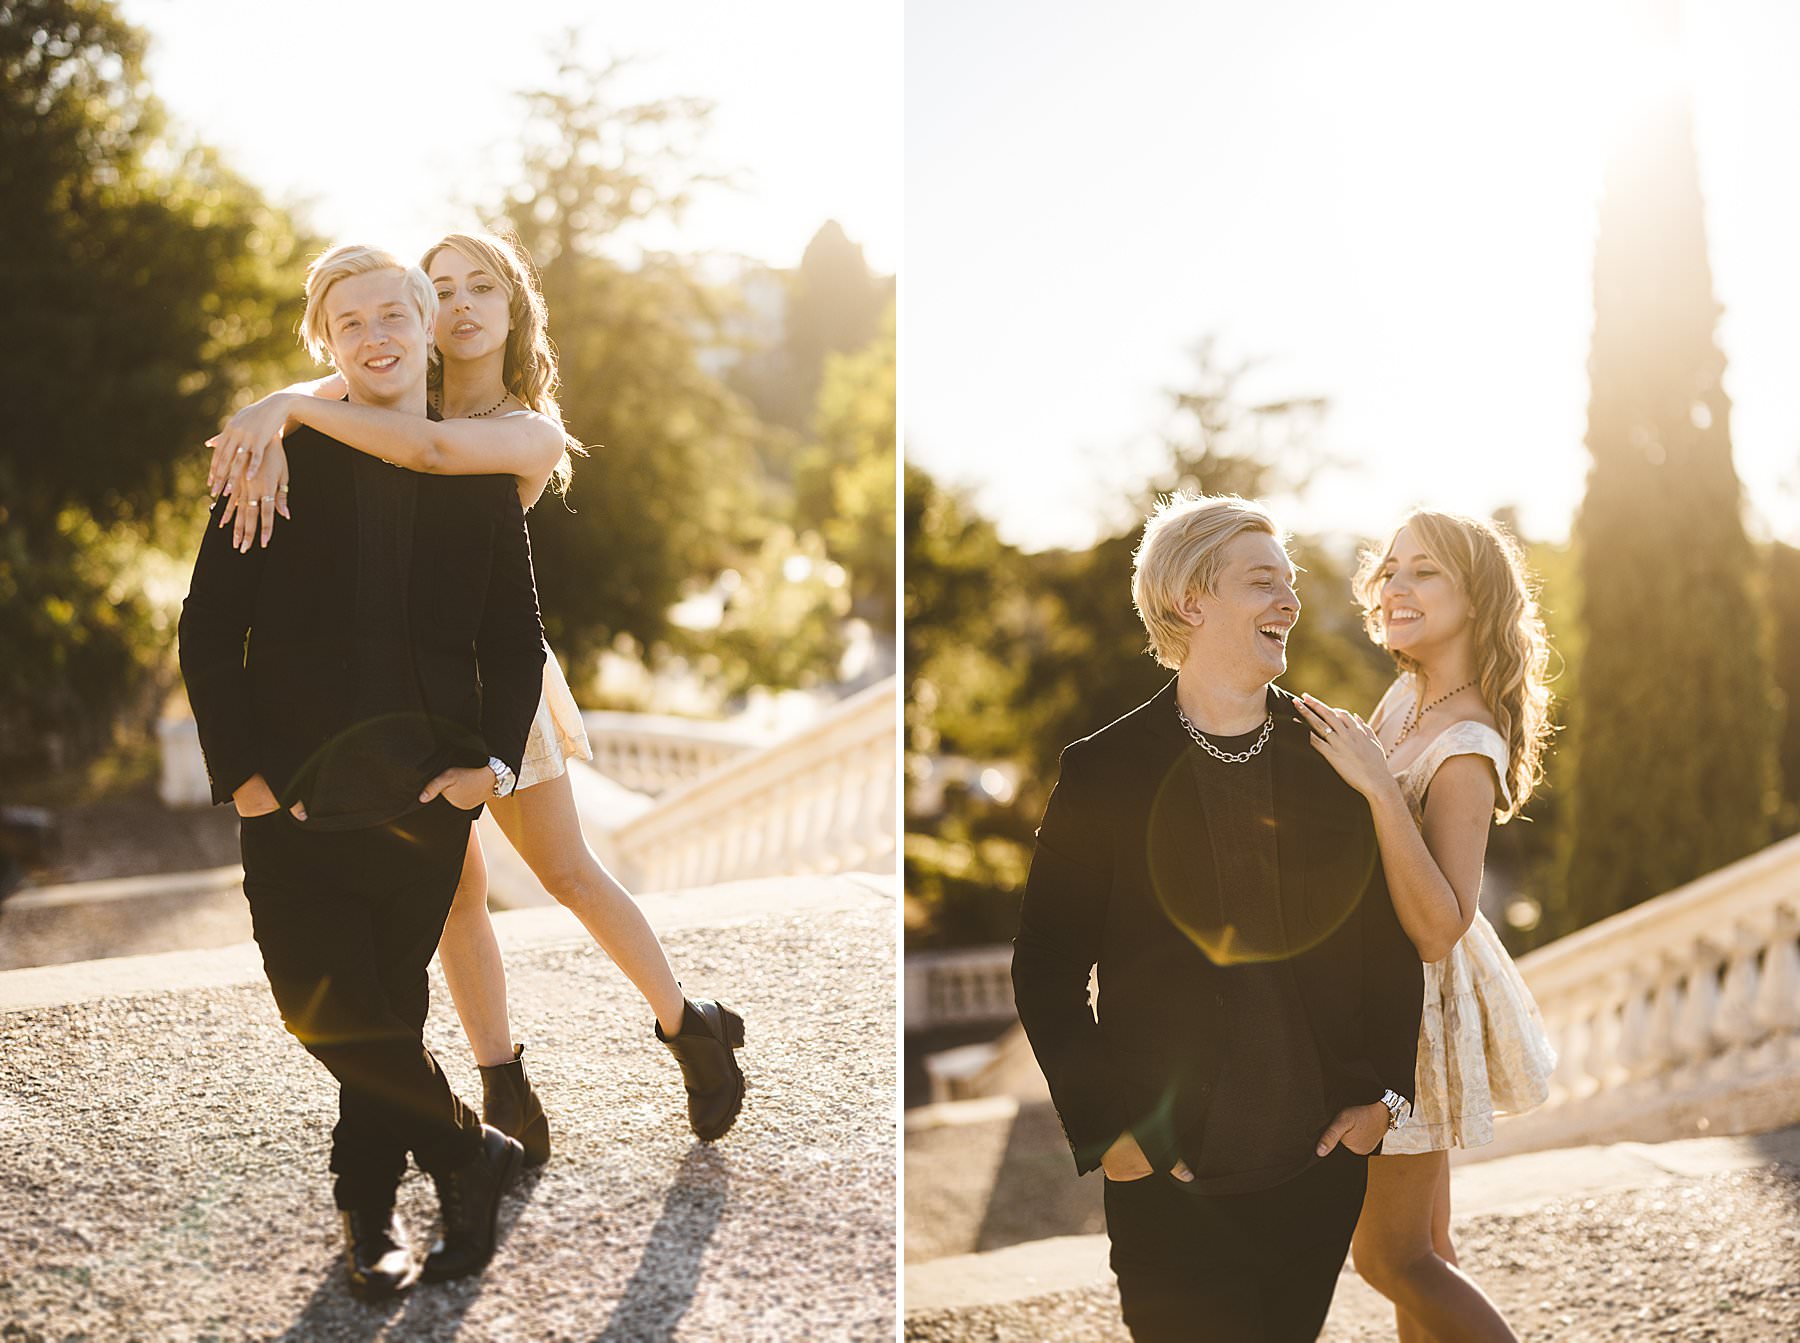 Lovely engagement couple portrait photo shoot in Florence, Italy